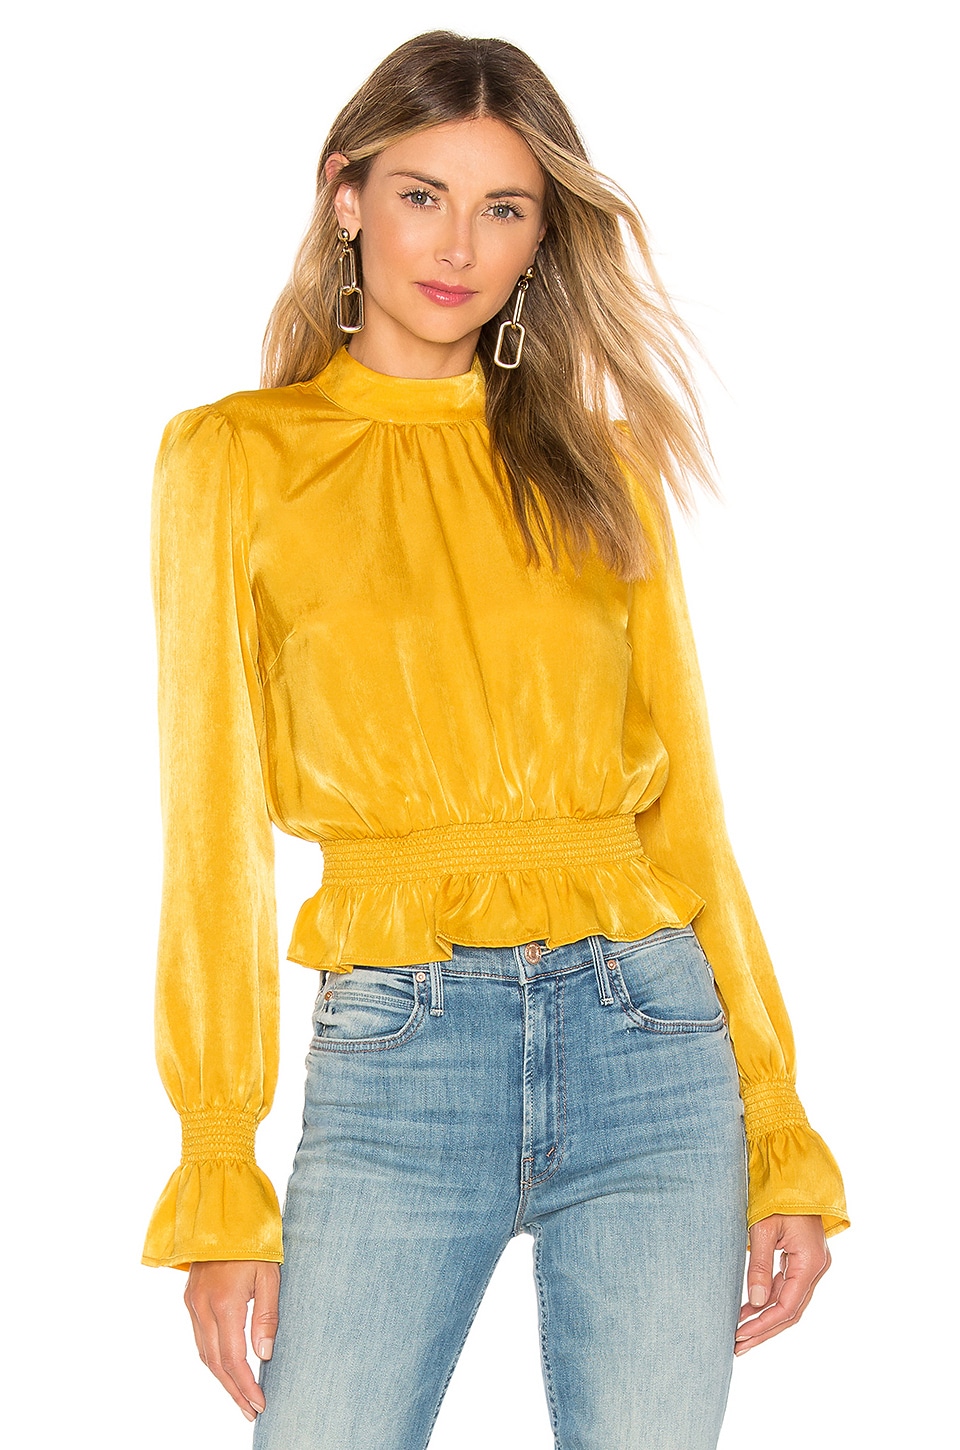 Tularosa I'm Yours Top in Yellow | REVOLVE